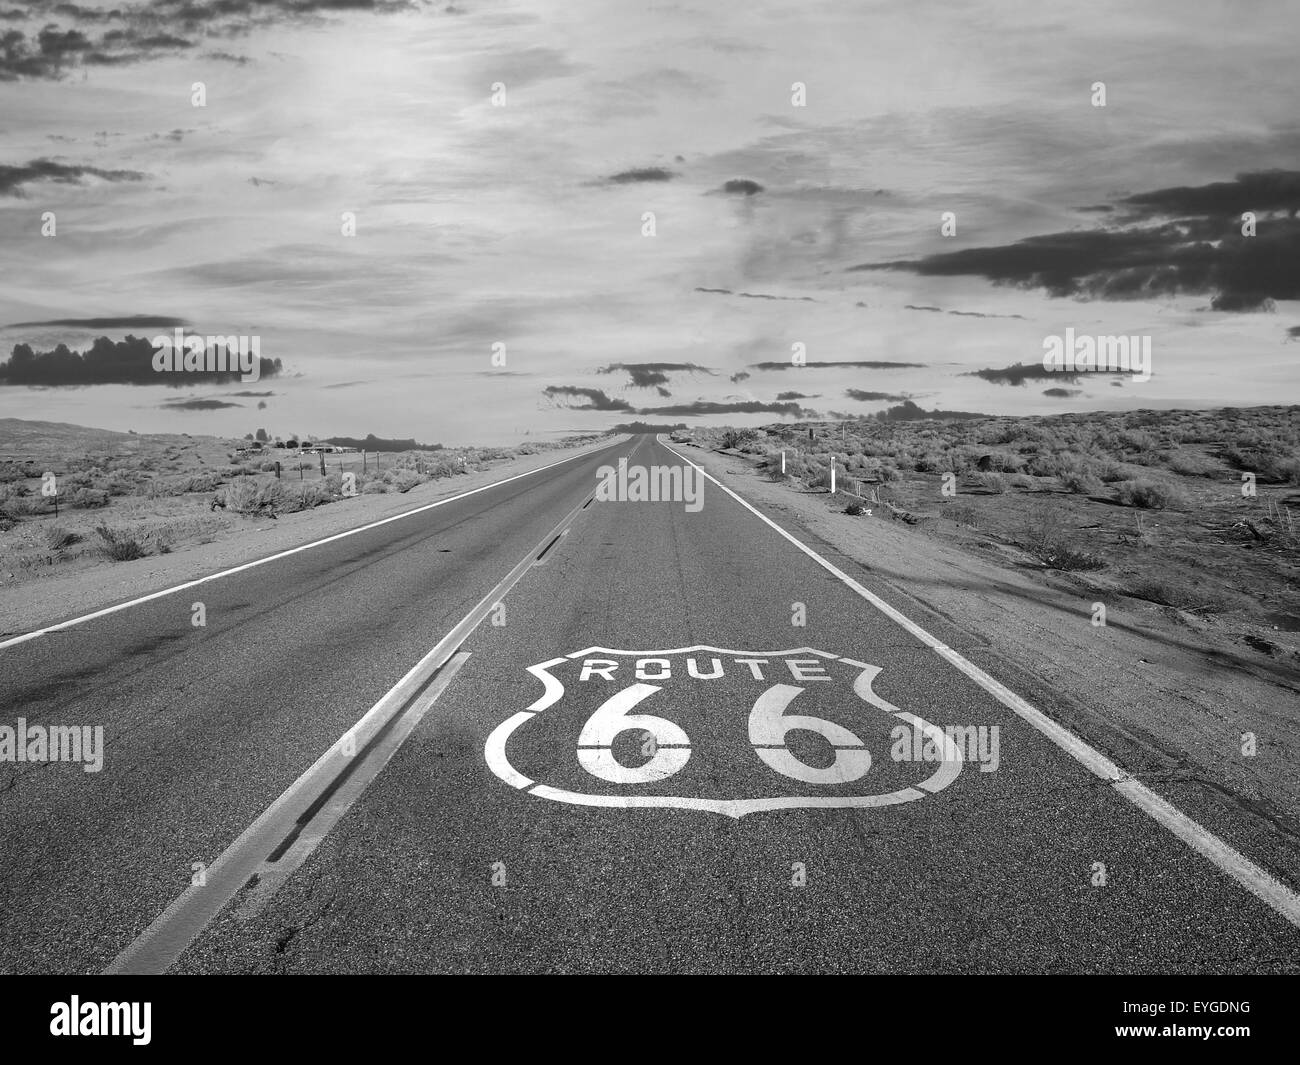 Route 66 pavement sign black and white in California's Mojave desert. Stock Photo